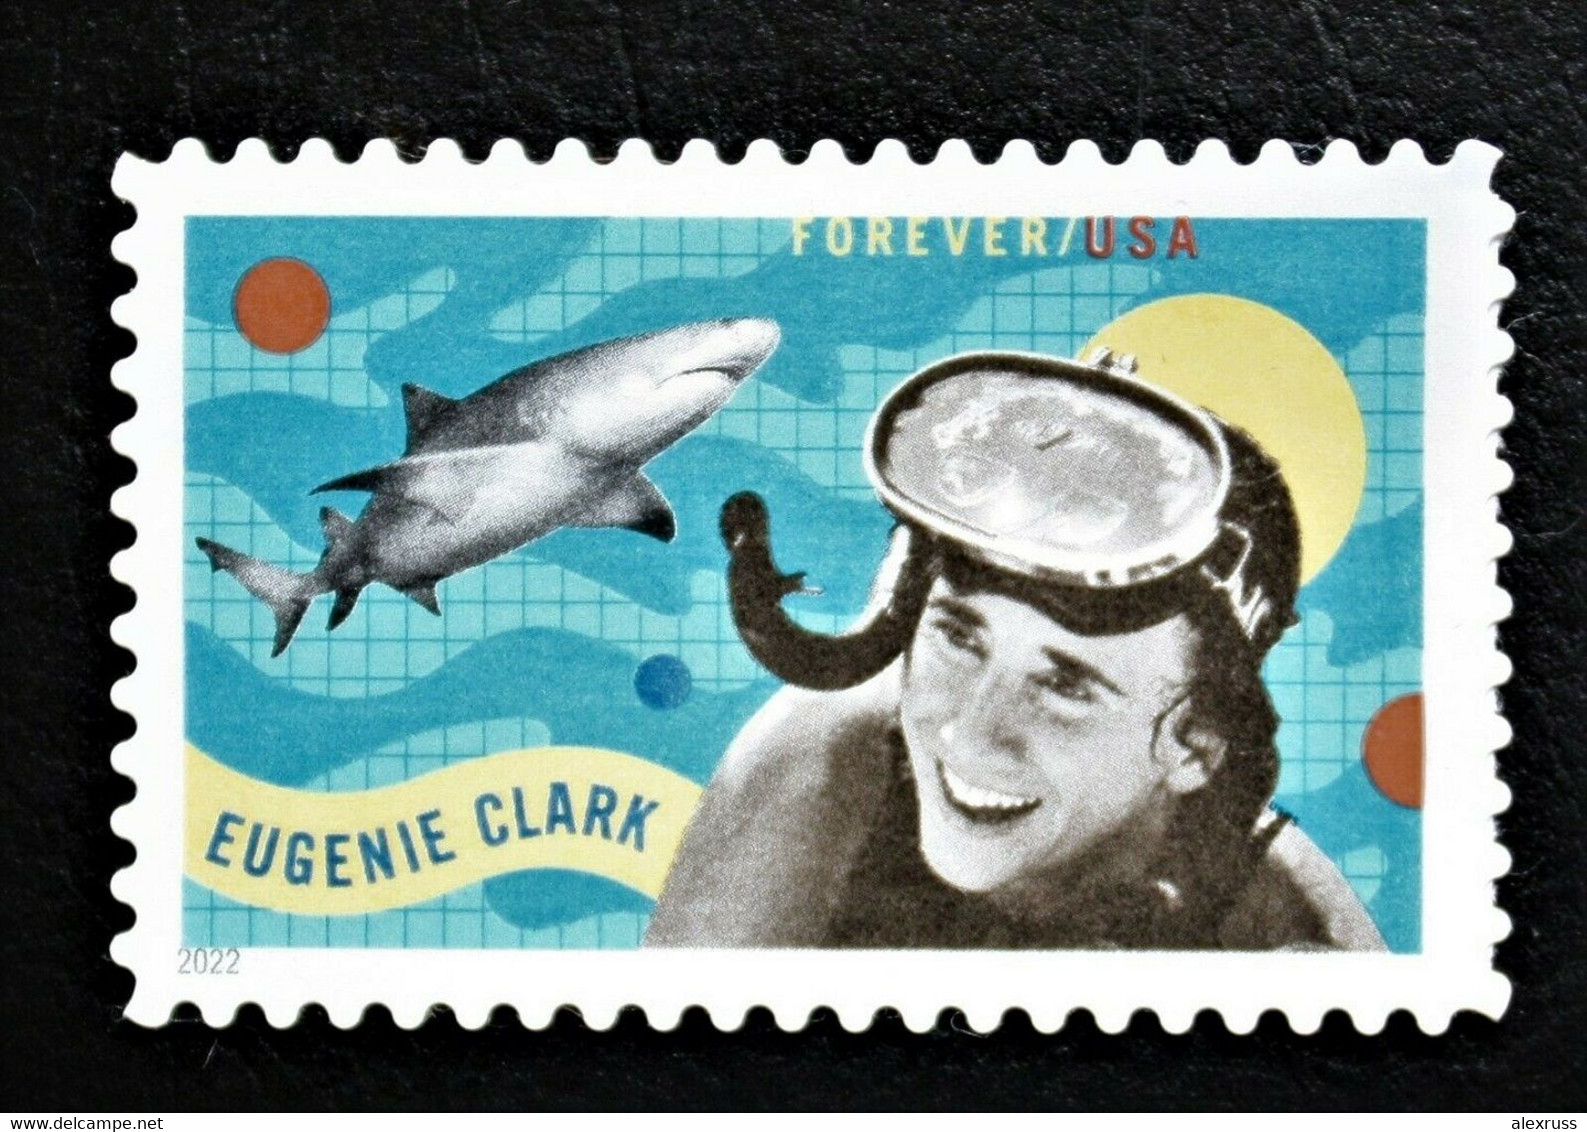 US 2022 Eugenie Clark "Shark Lady" Sheet Of 20 Forever Stamps, Scott # 5693,Special Micro Printing+, VF MNH** - Nuevos